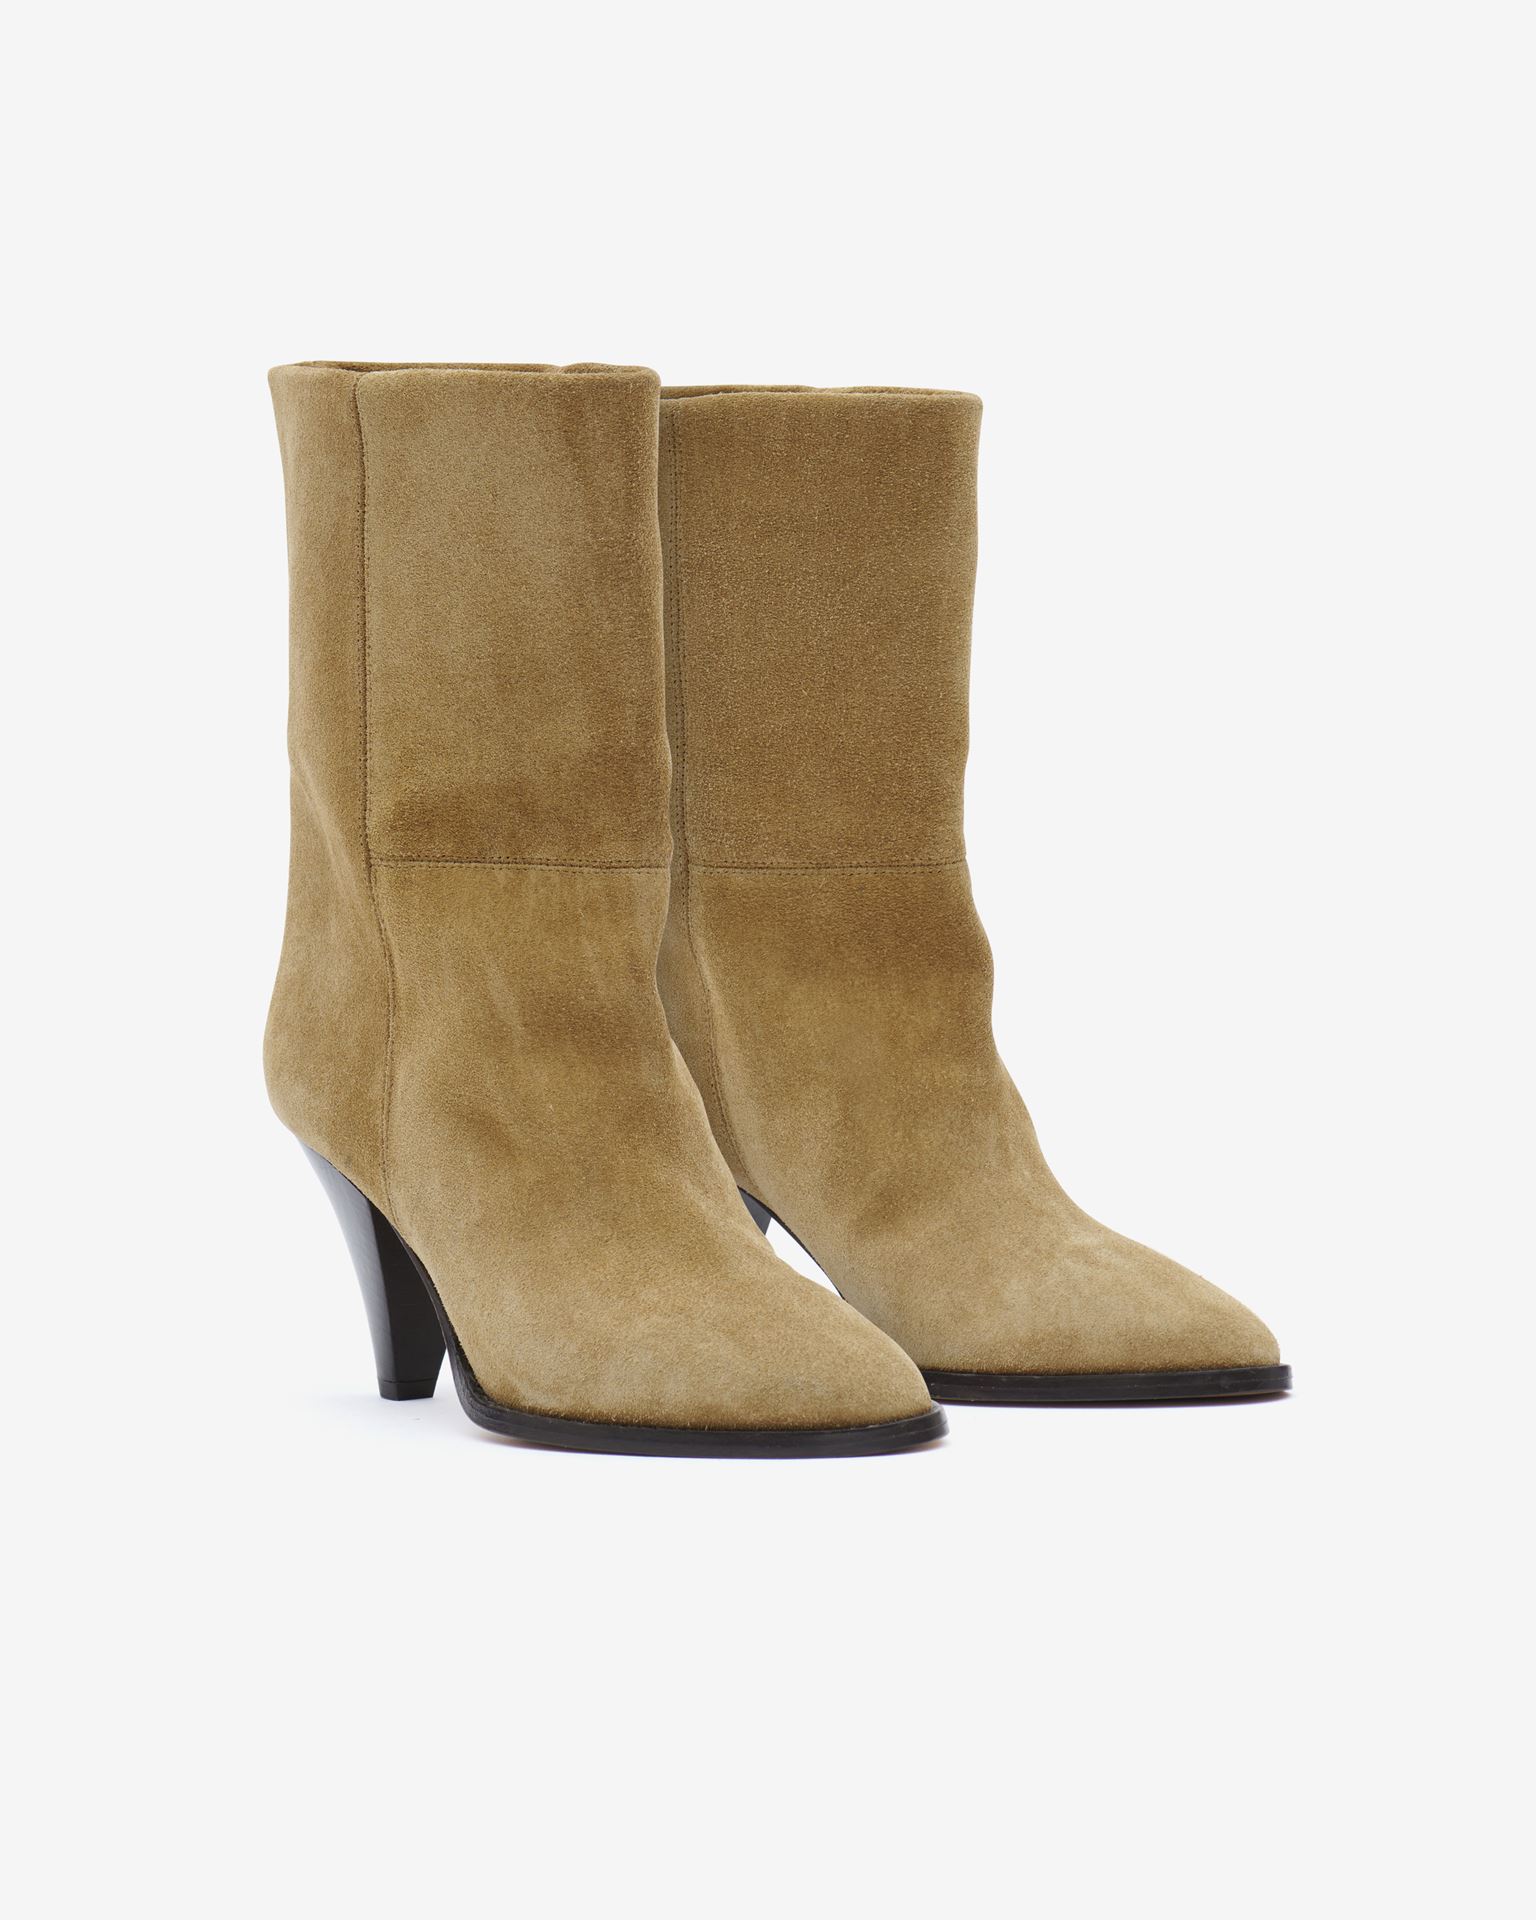 Isabel Marant, Rouxa Suede Leather Low Boots - Women - Brown